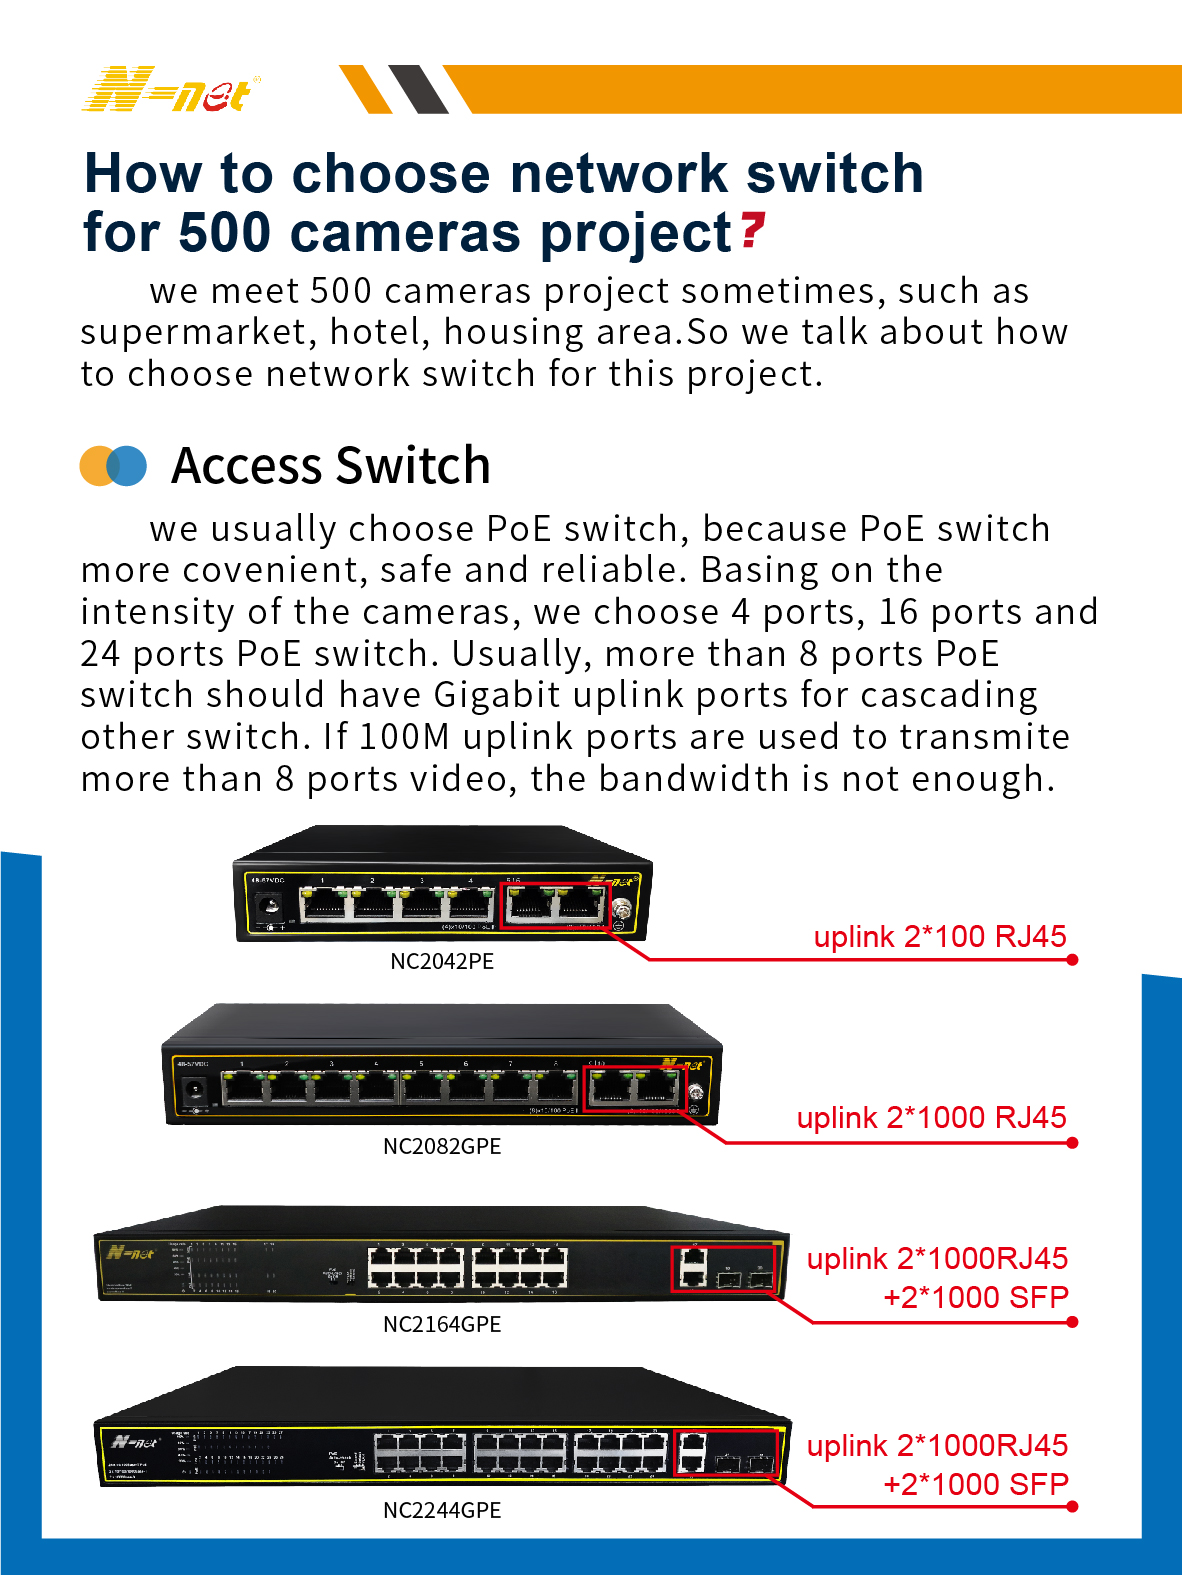 How to choose network switch for 500 cameras project?